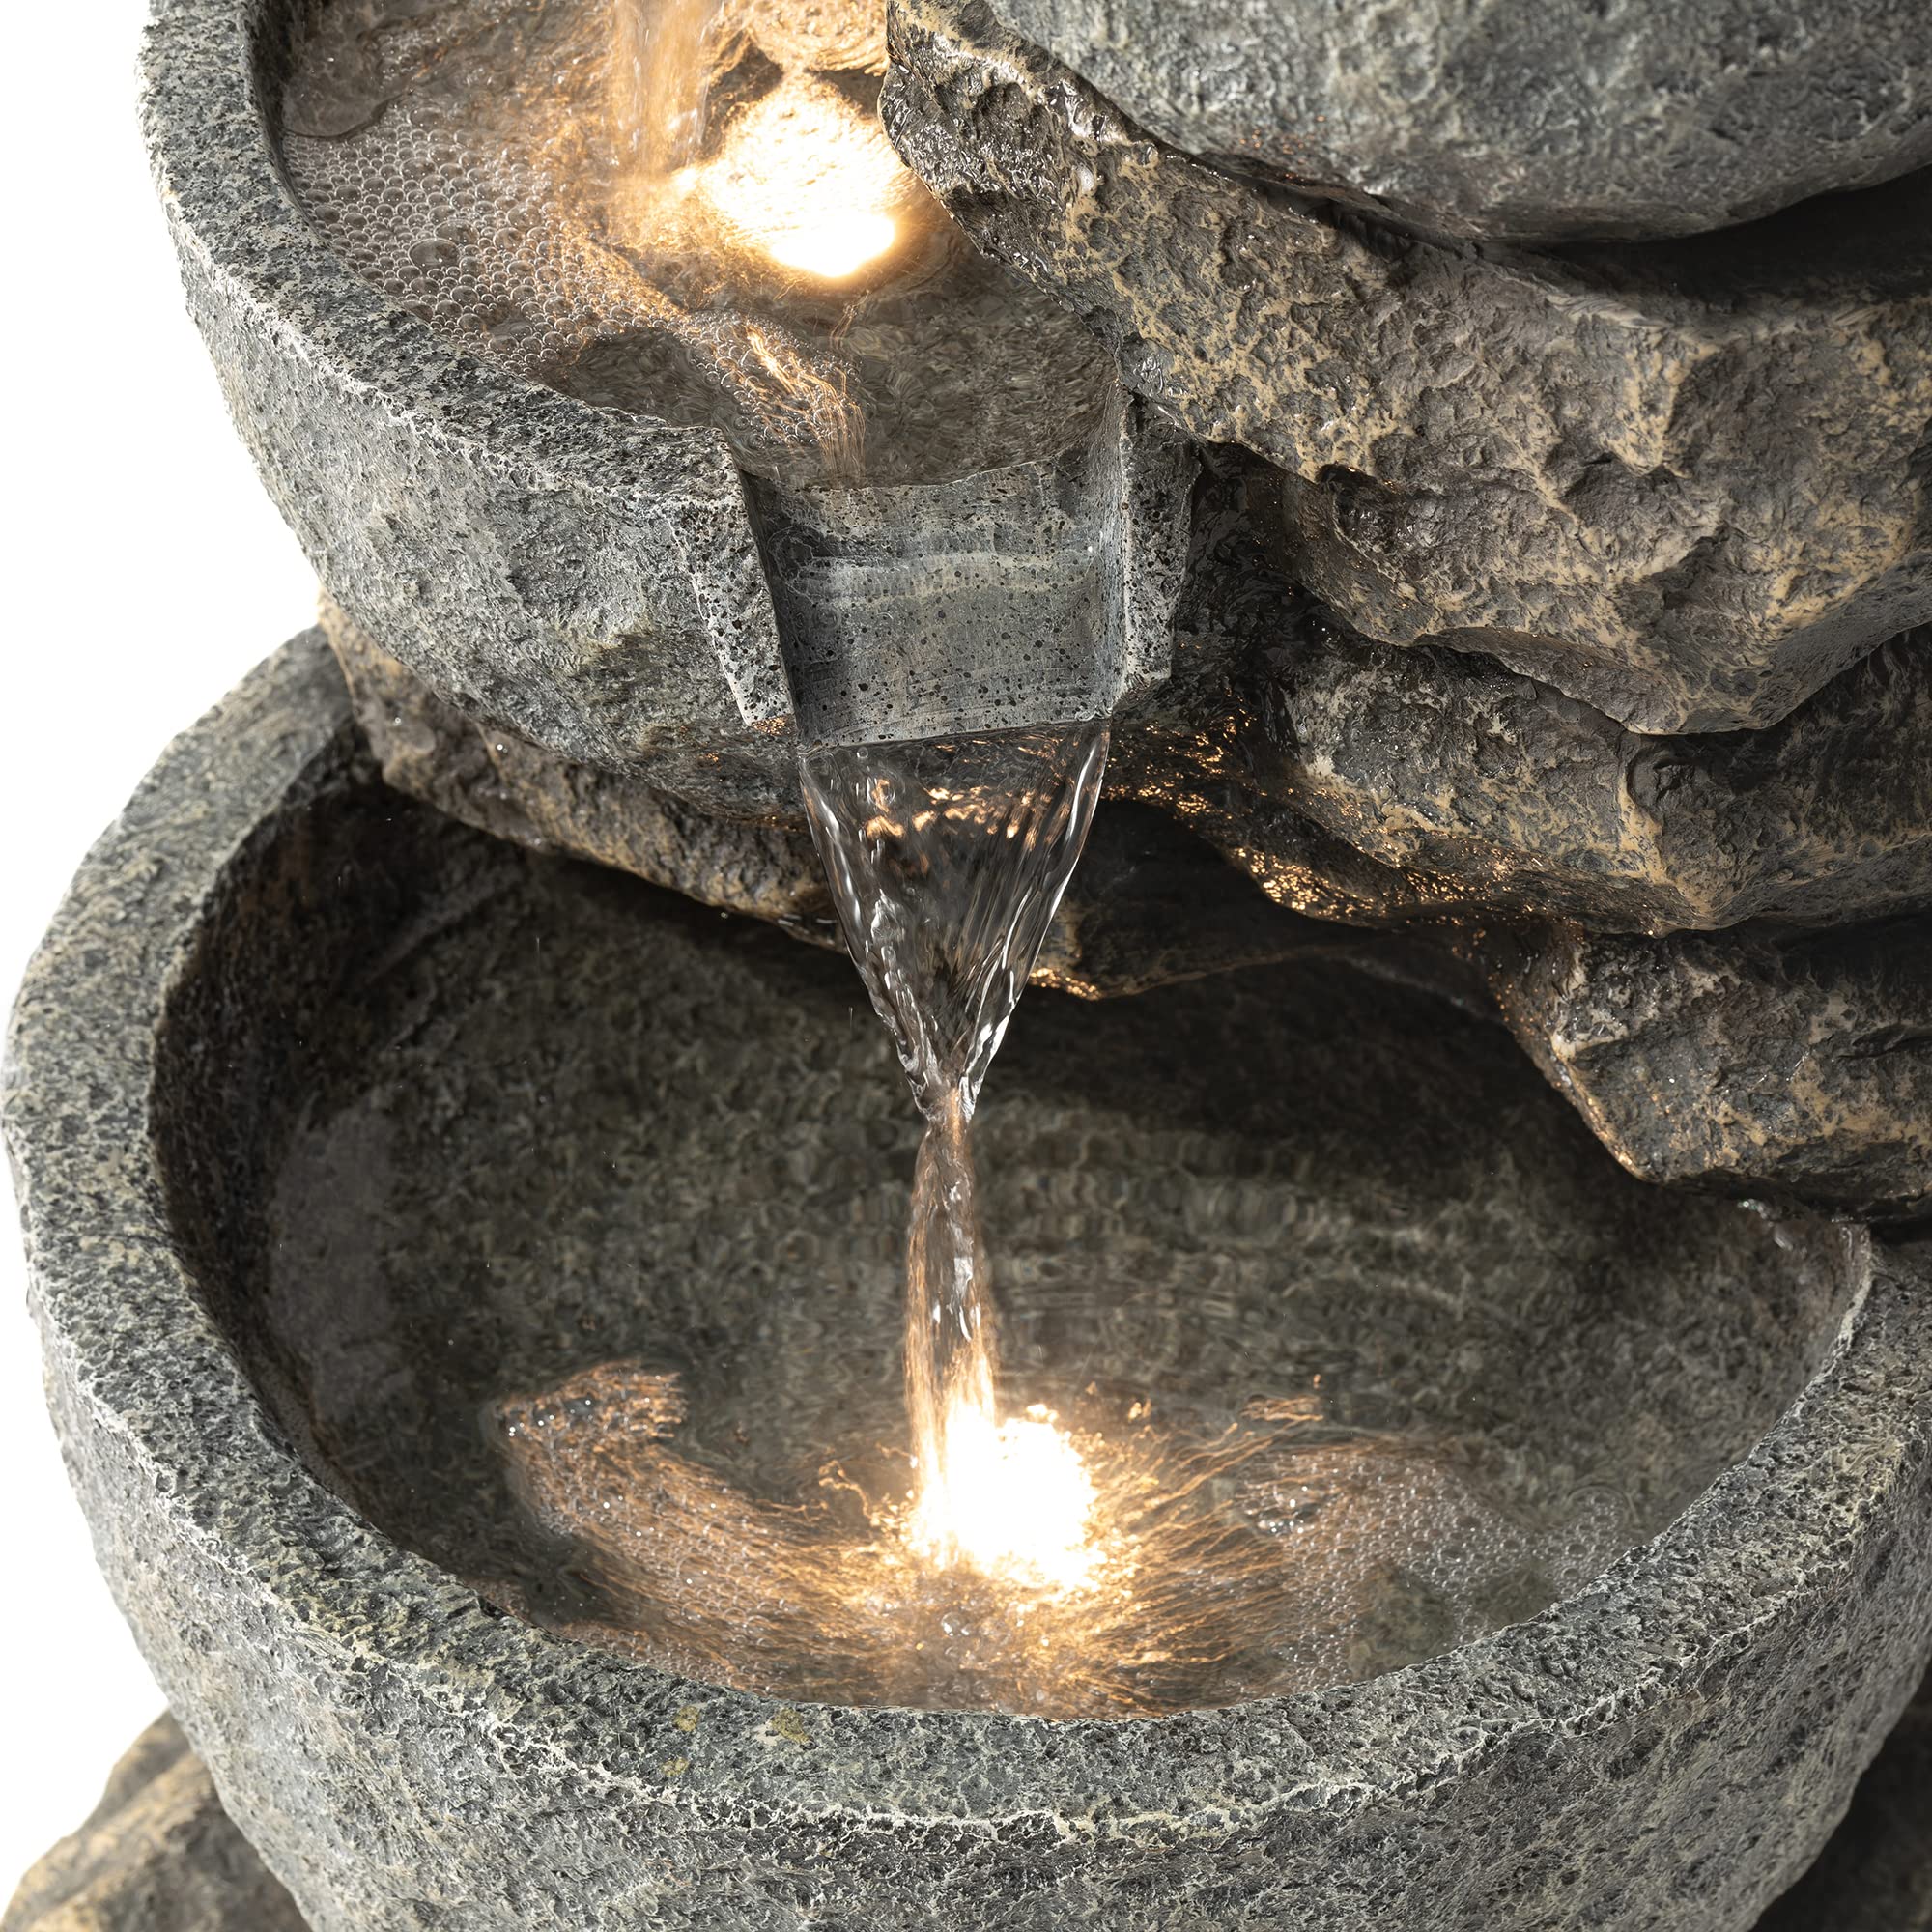 Glitzhome GH11246 Polyresin Stone 4-Tiered Bowls Fountain with LED Lights Outdoor Decorative Water Feature, 32.25" H, Gray